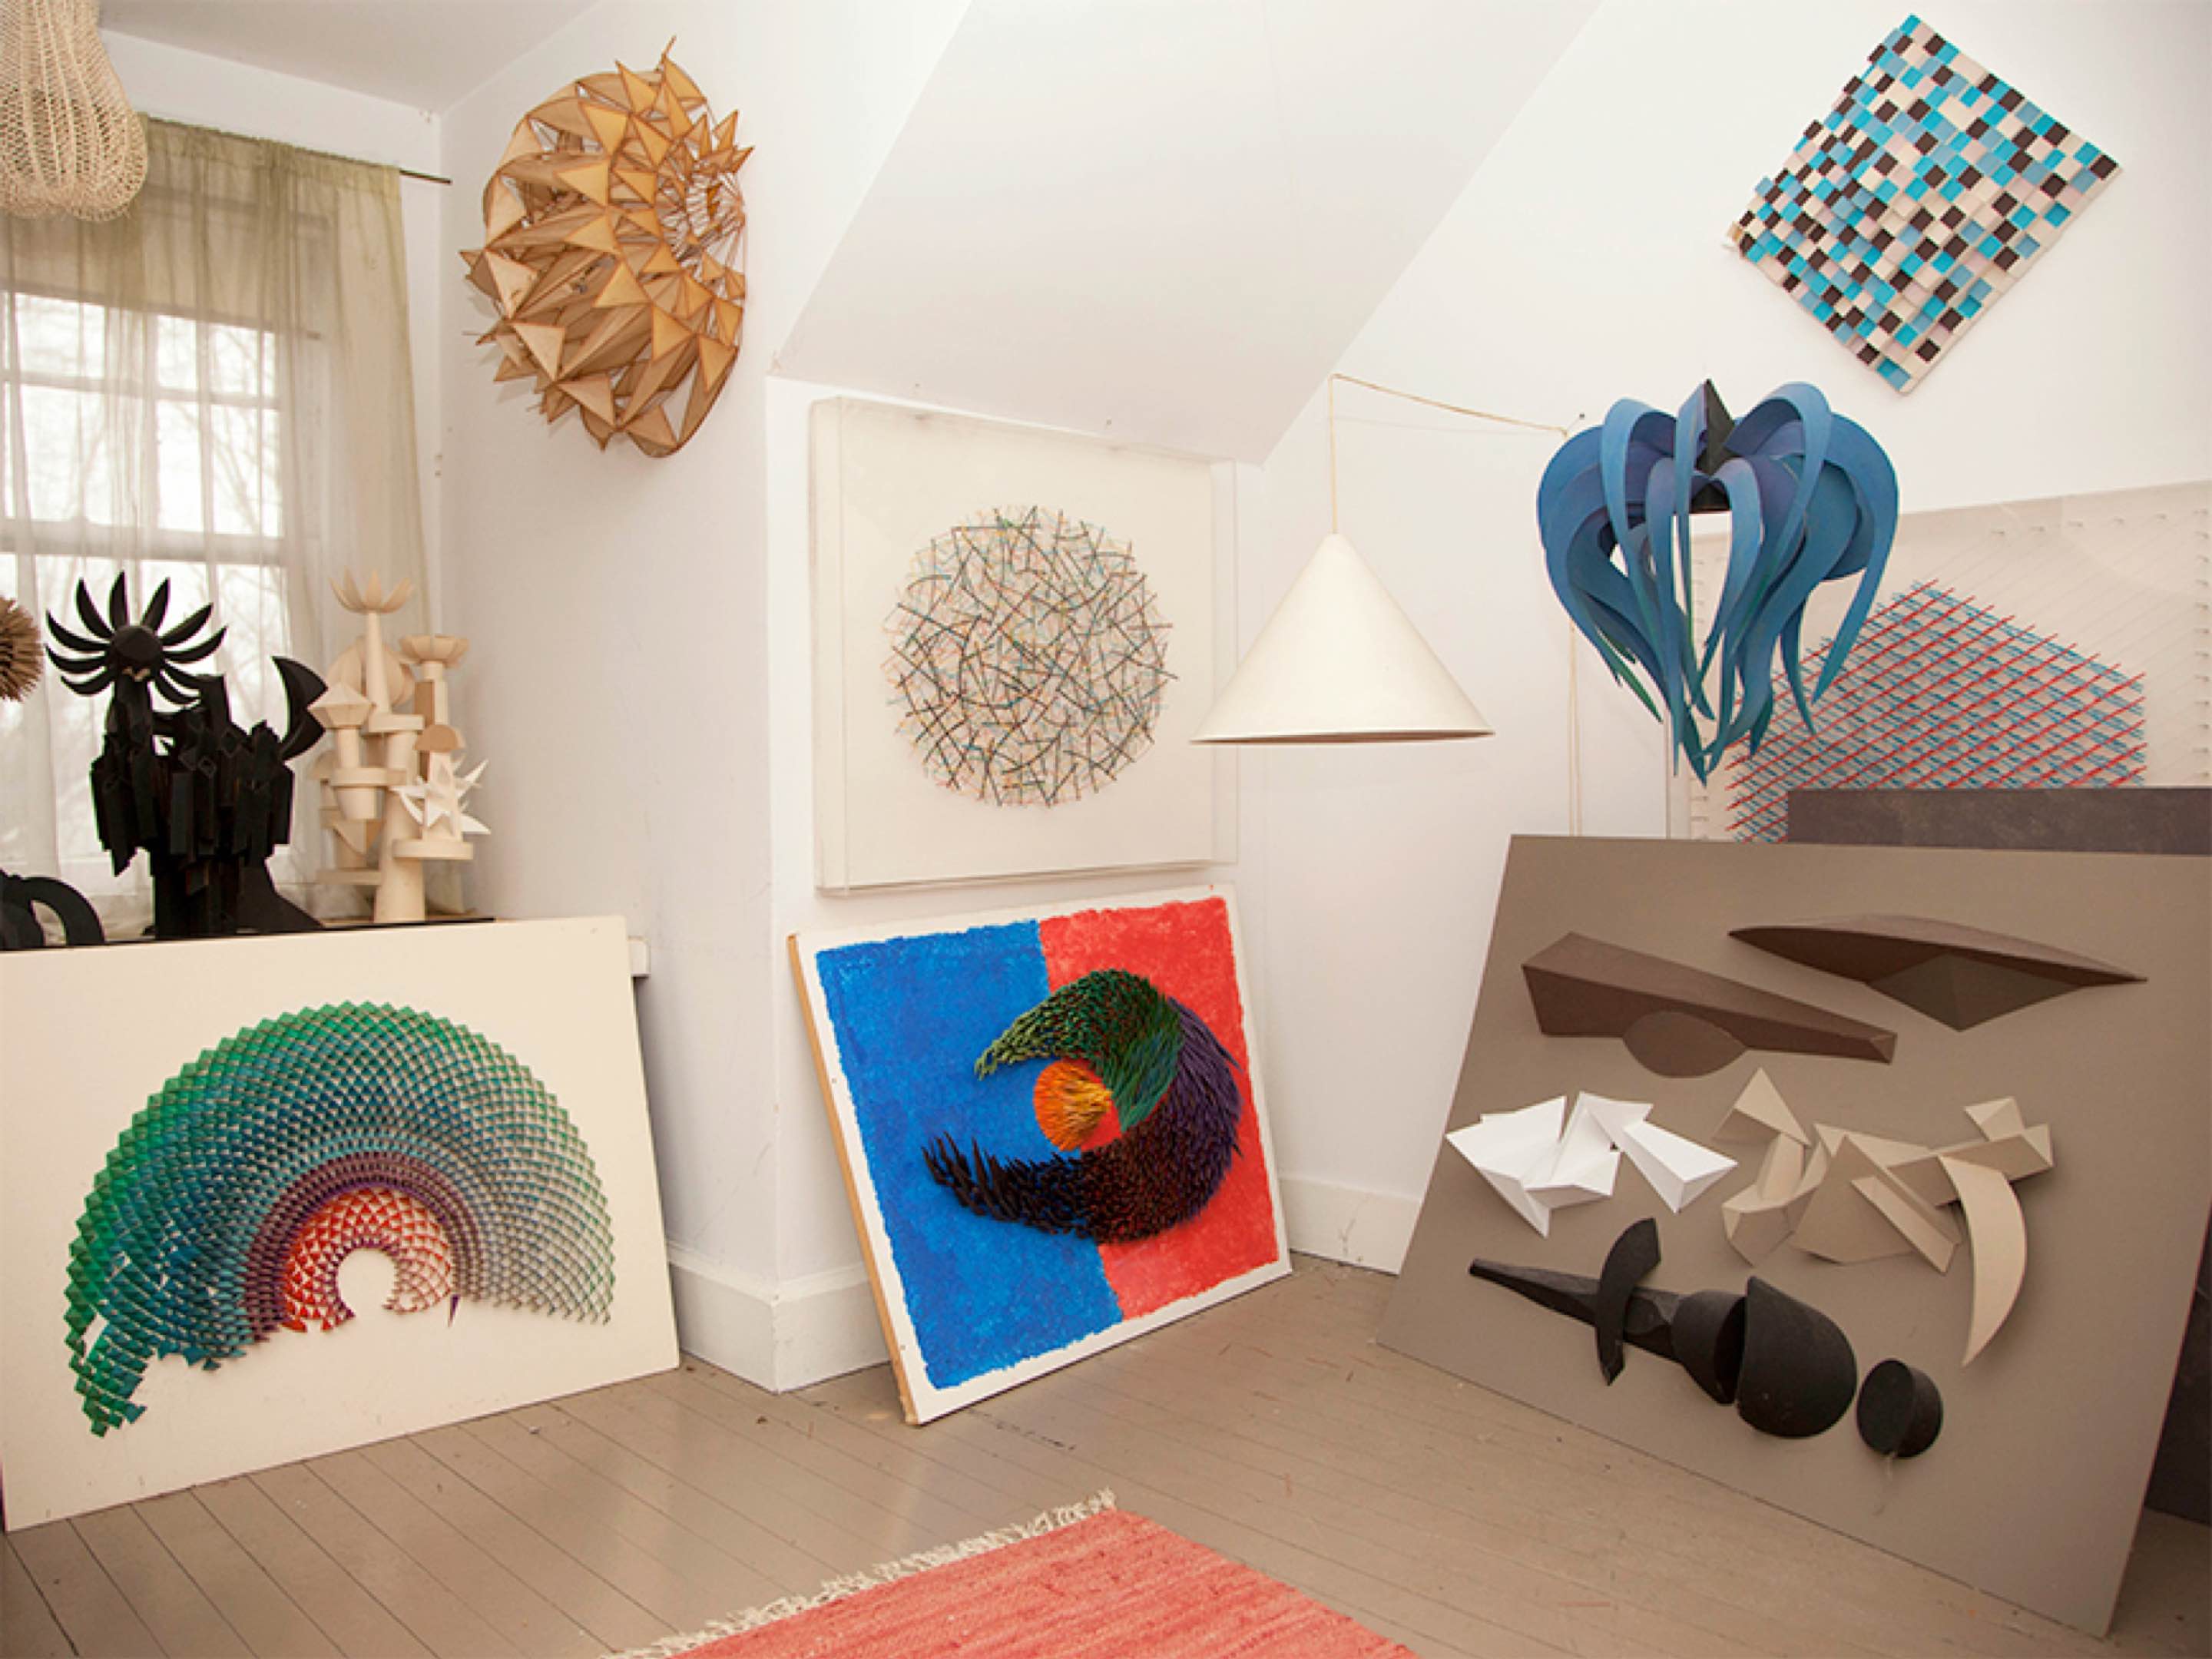 Various pieces of artwork on display in designer Irving Harper's home.